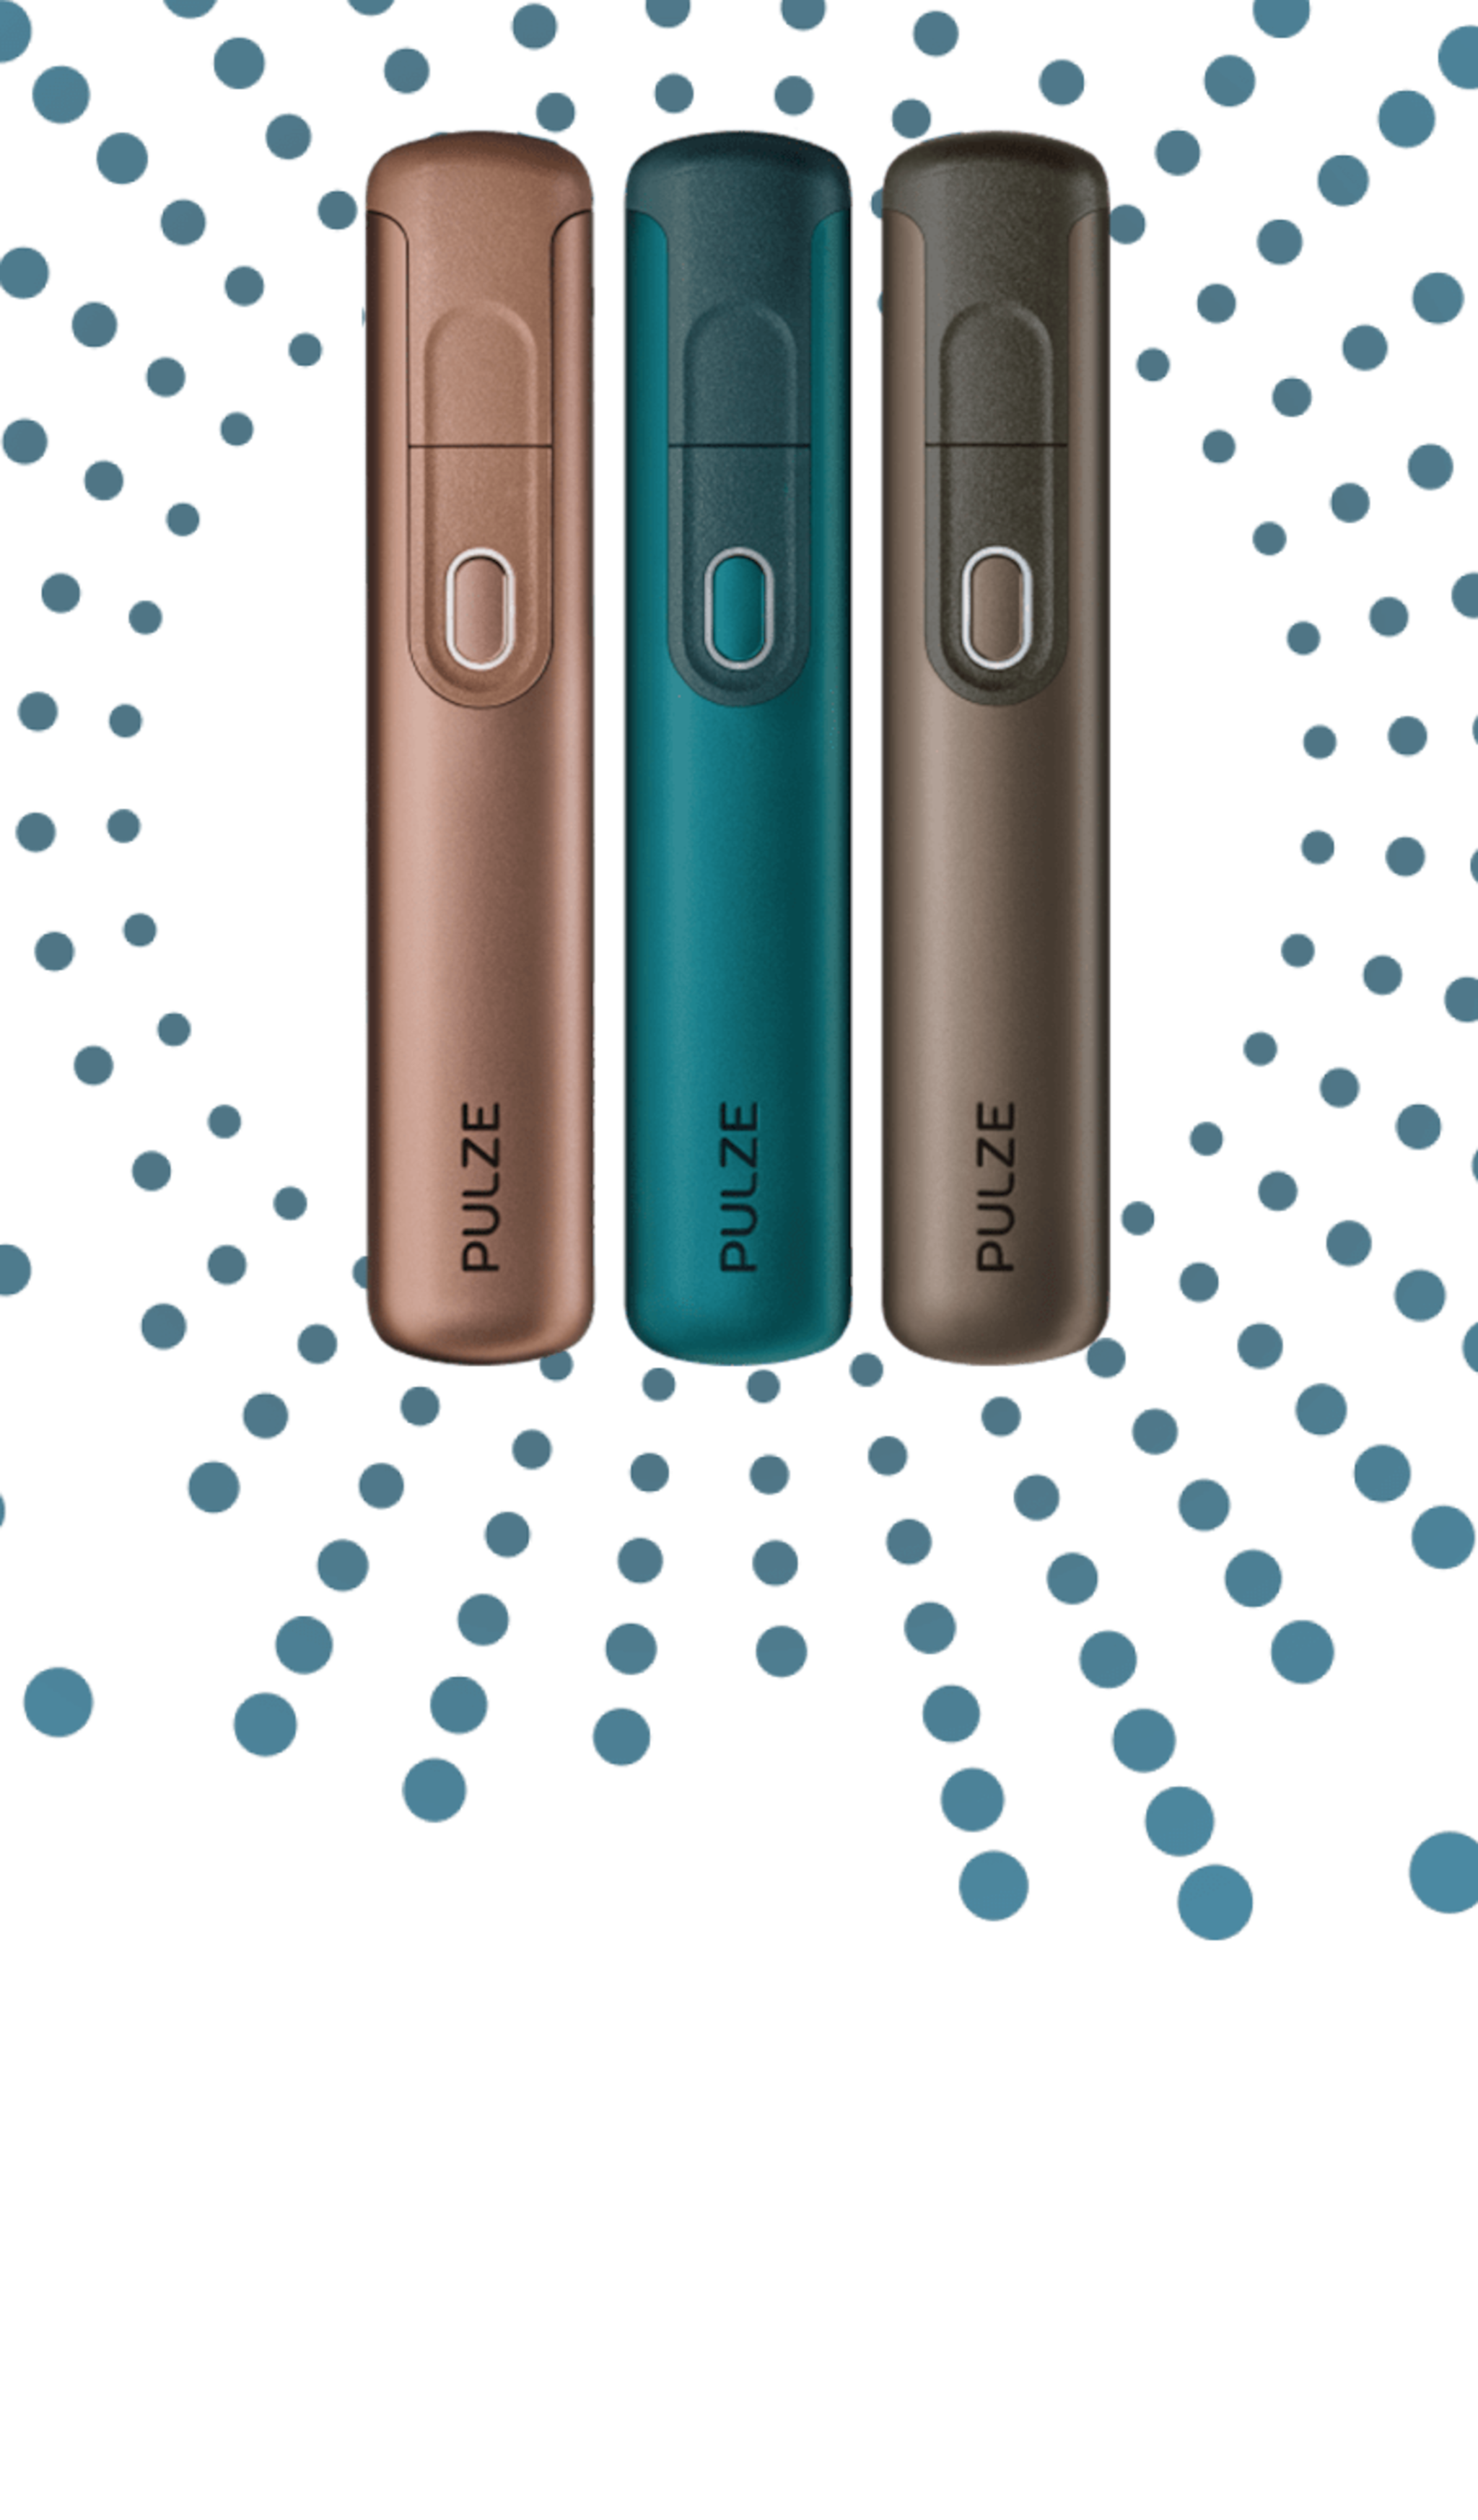 Pulze devices in 3 different colours